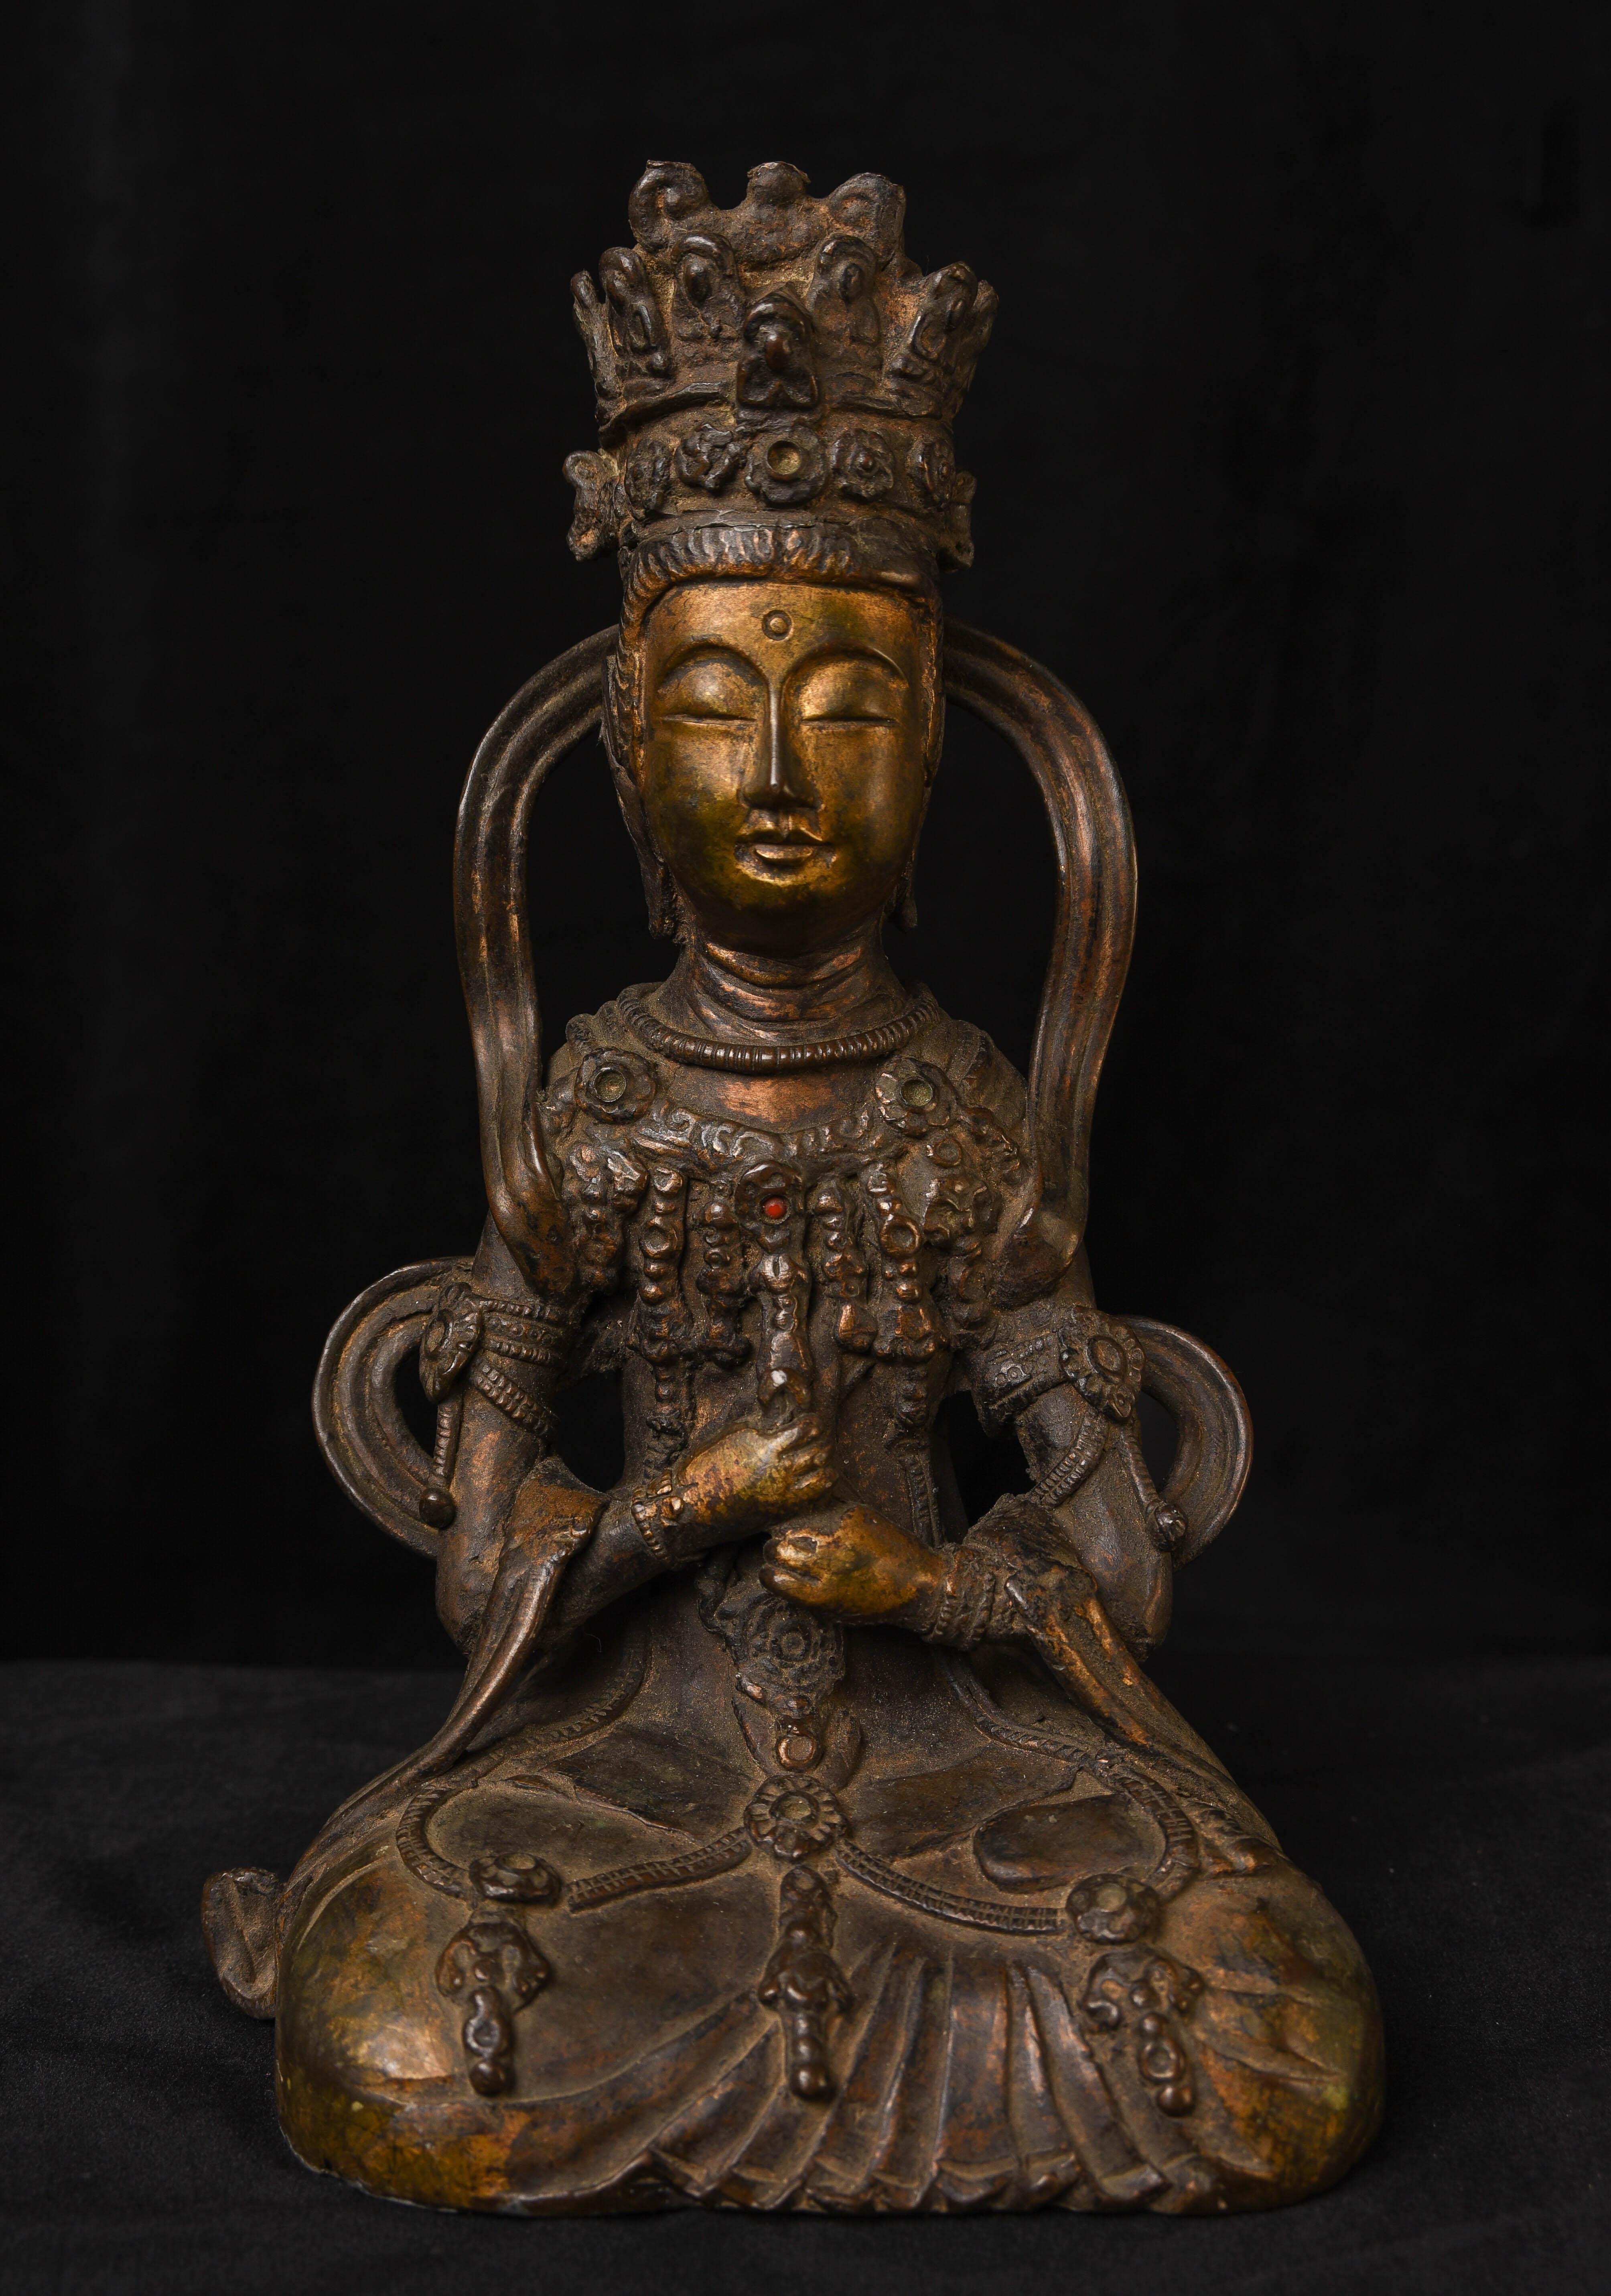 19thC or earlier  bronze Bodhisattva Vairocana, who is associated with wisdom and emptiness. Possibly as early as 15thC based on the style and overall look, but the casting and patina make a later (18/19thC) dating need to be assigned in order to be